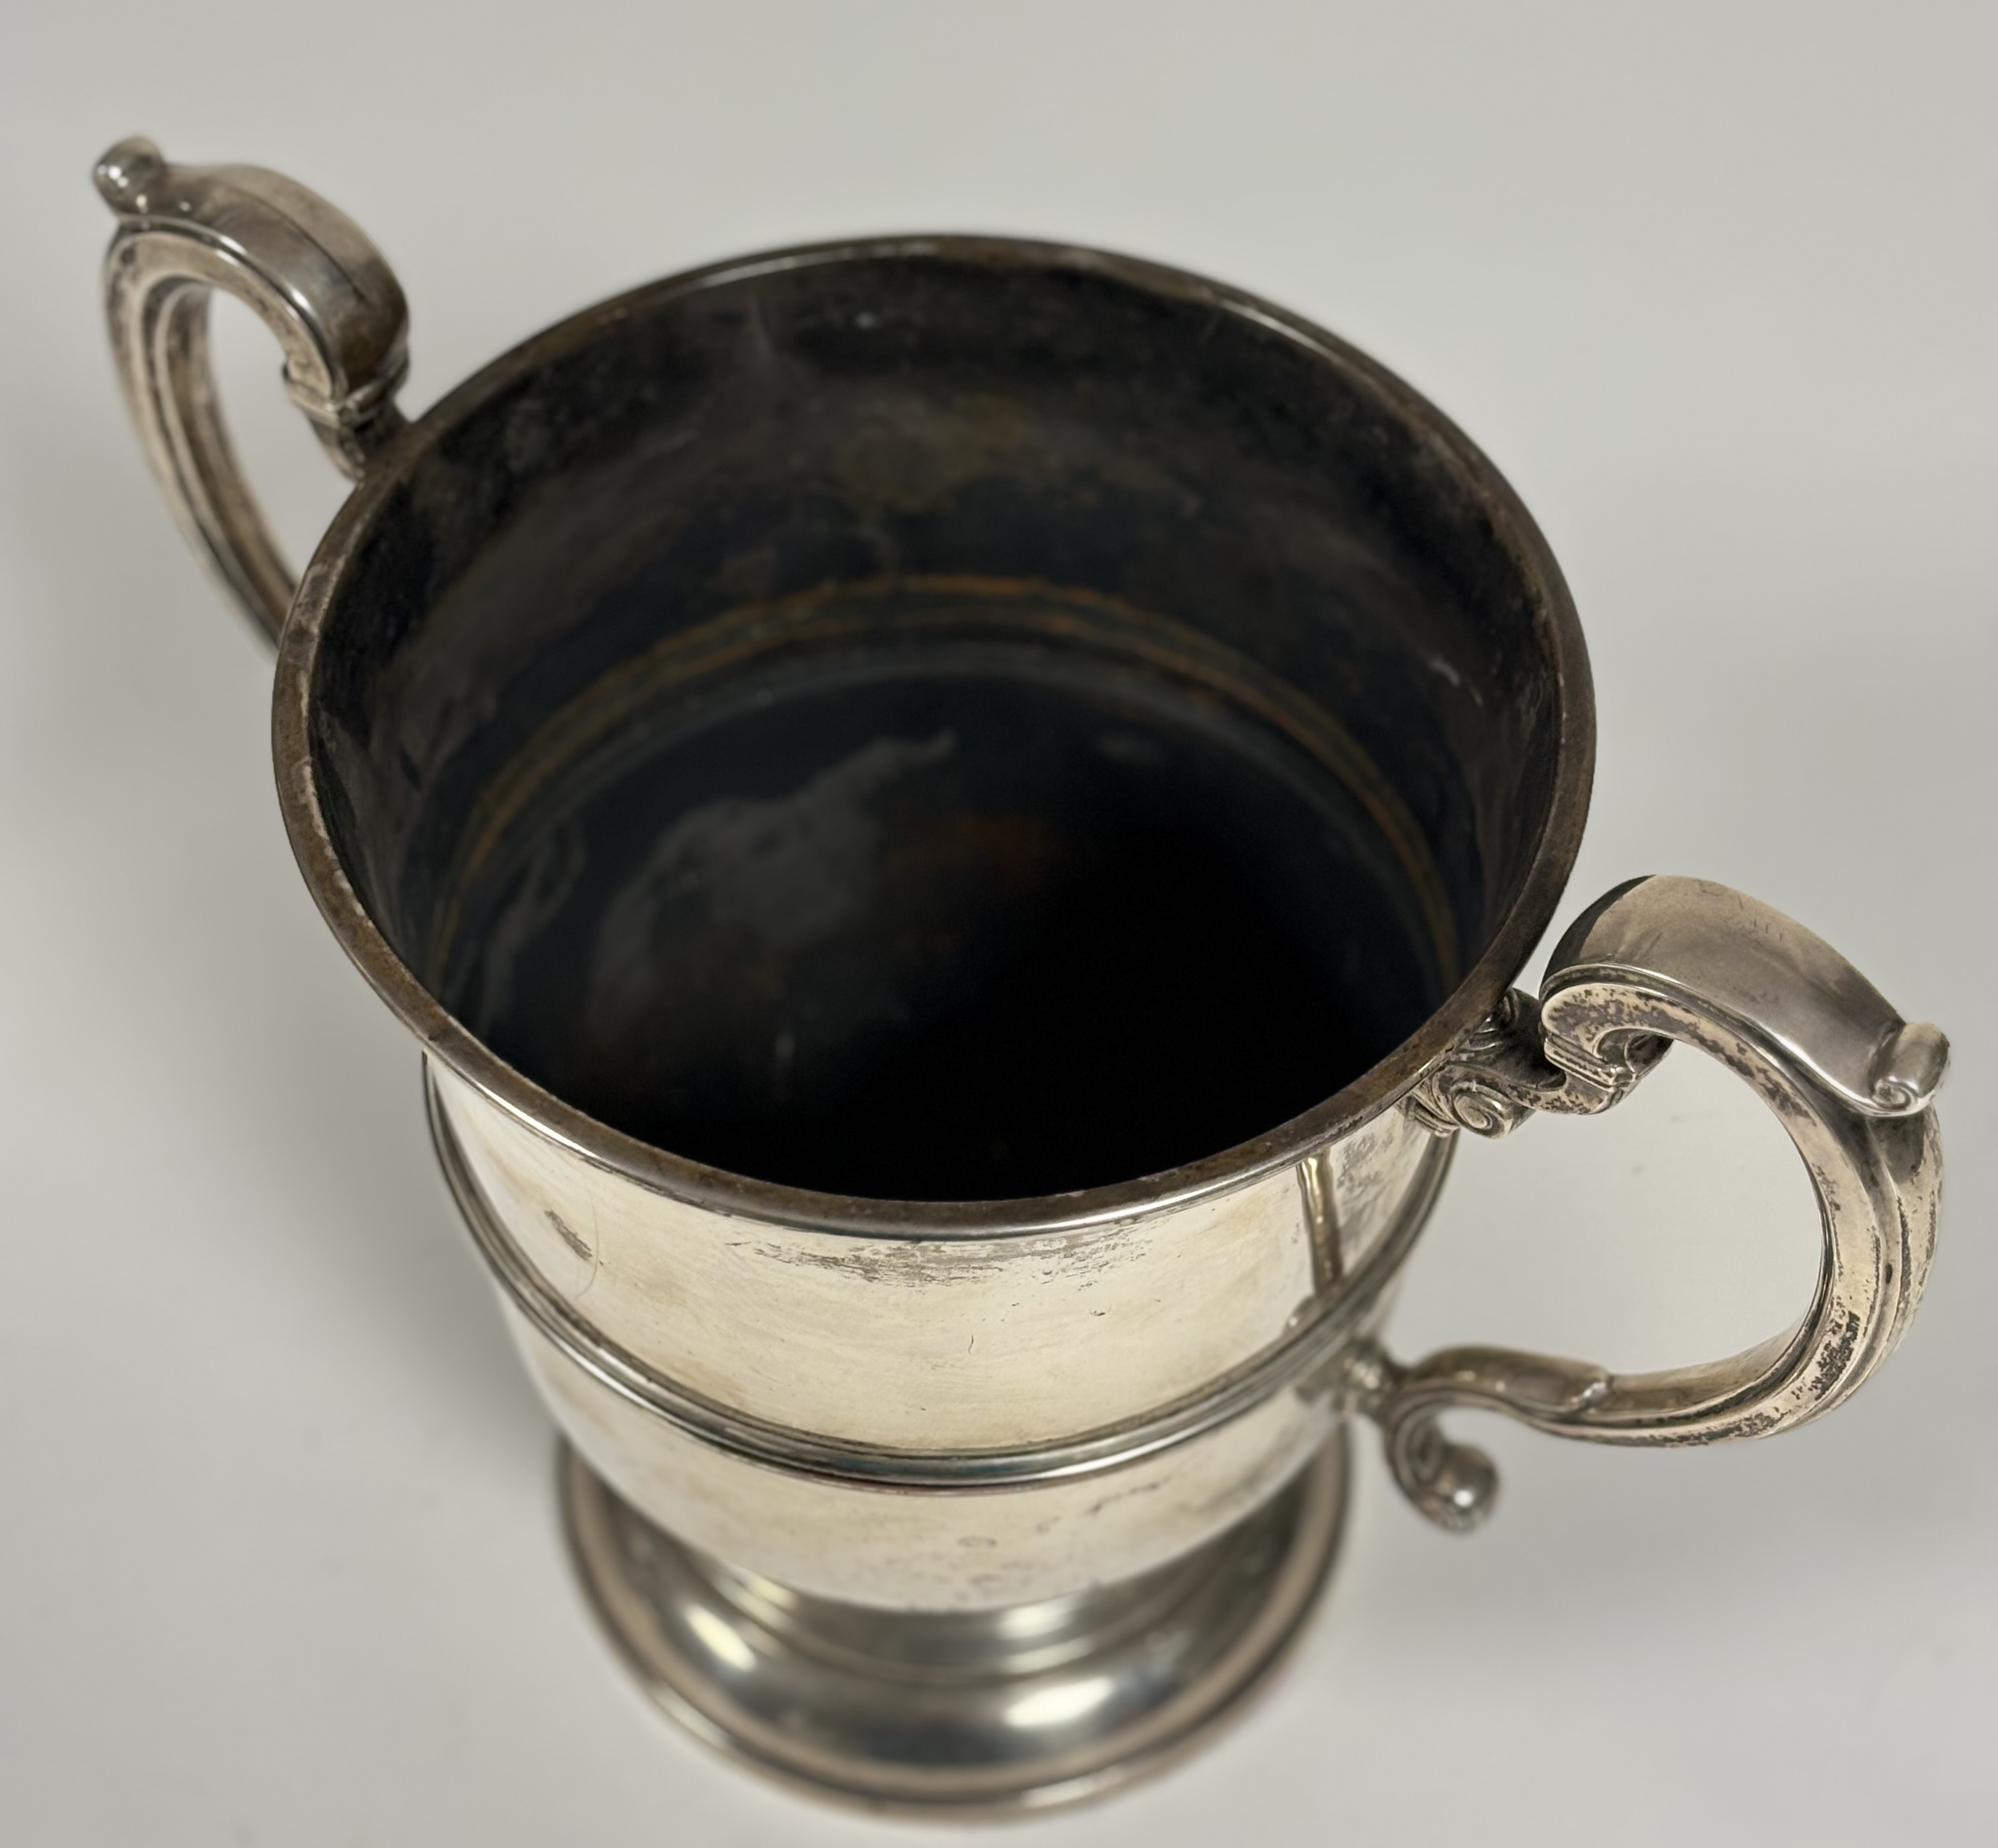 A large George V Scottish silver twin-handled trophy-form wine cooler or cup, Hamilton & Inches, Edi - Image 2 of 3